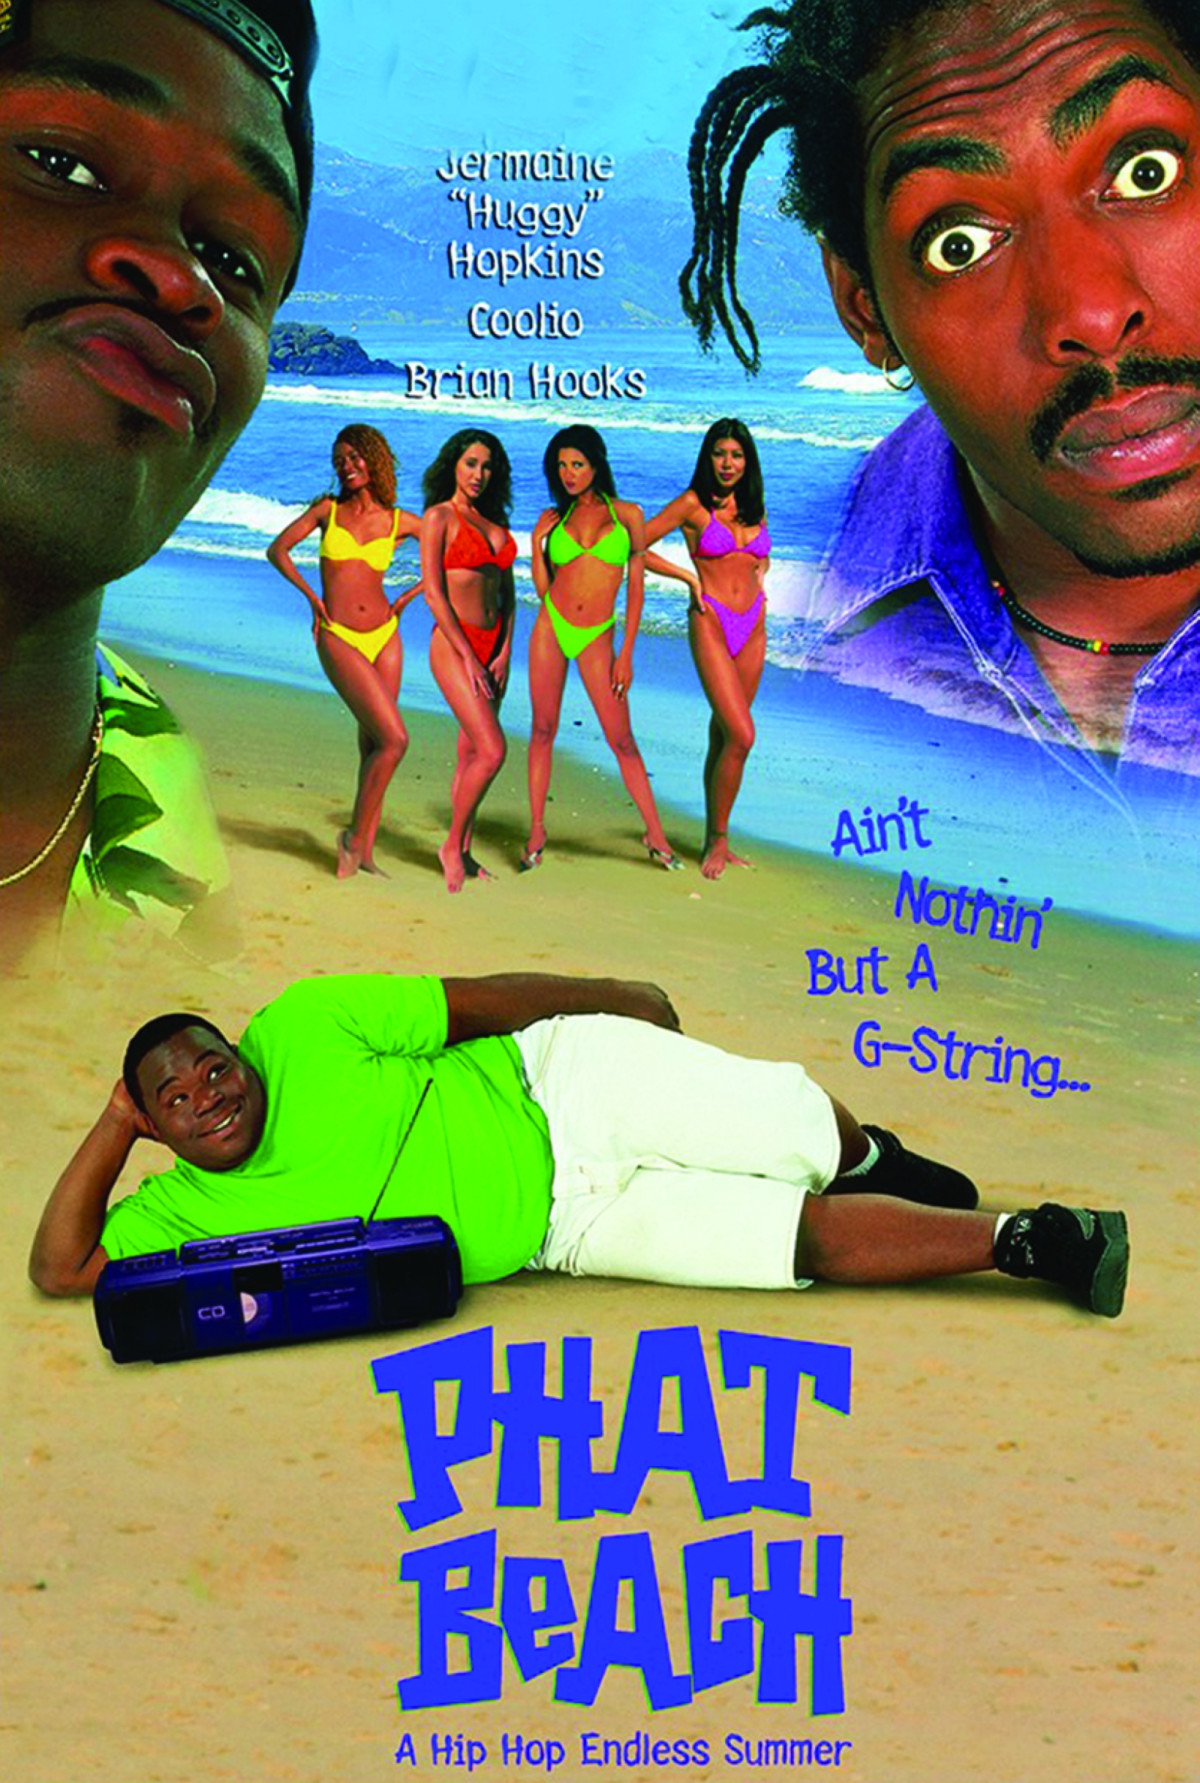 Beach Girls Movie Clips - The Oral History of Phat Beach | Complex